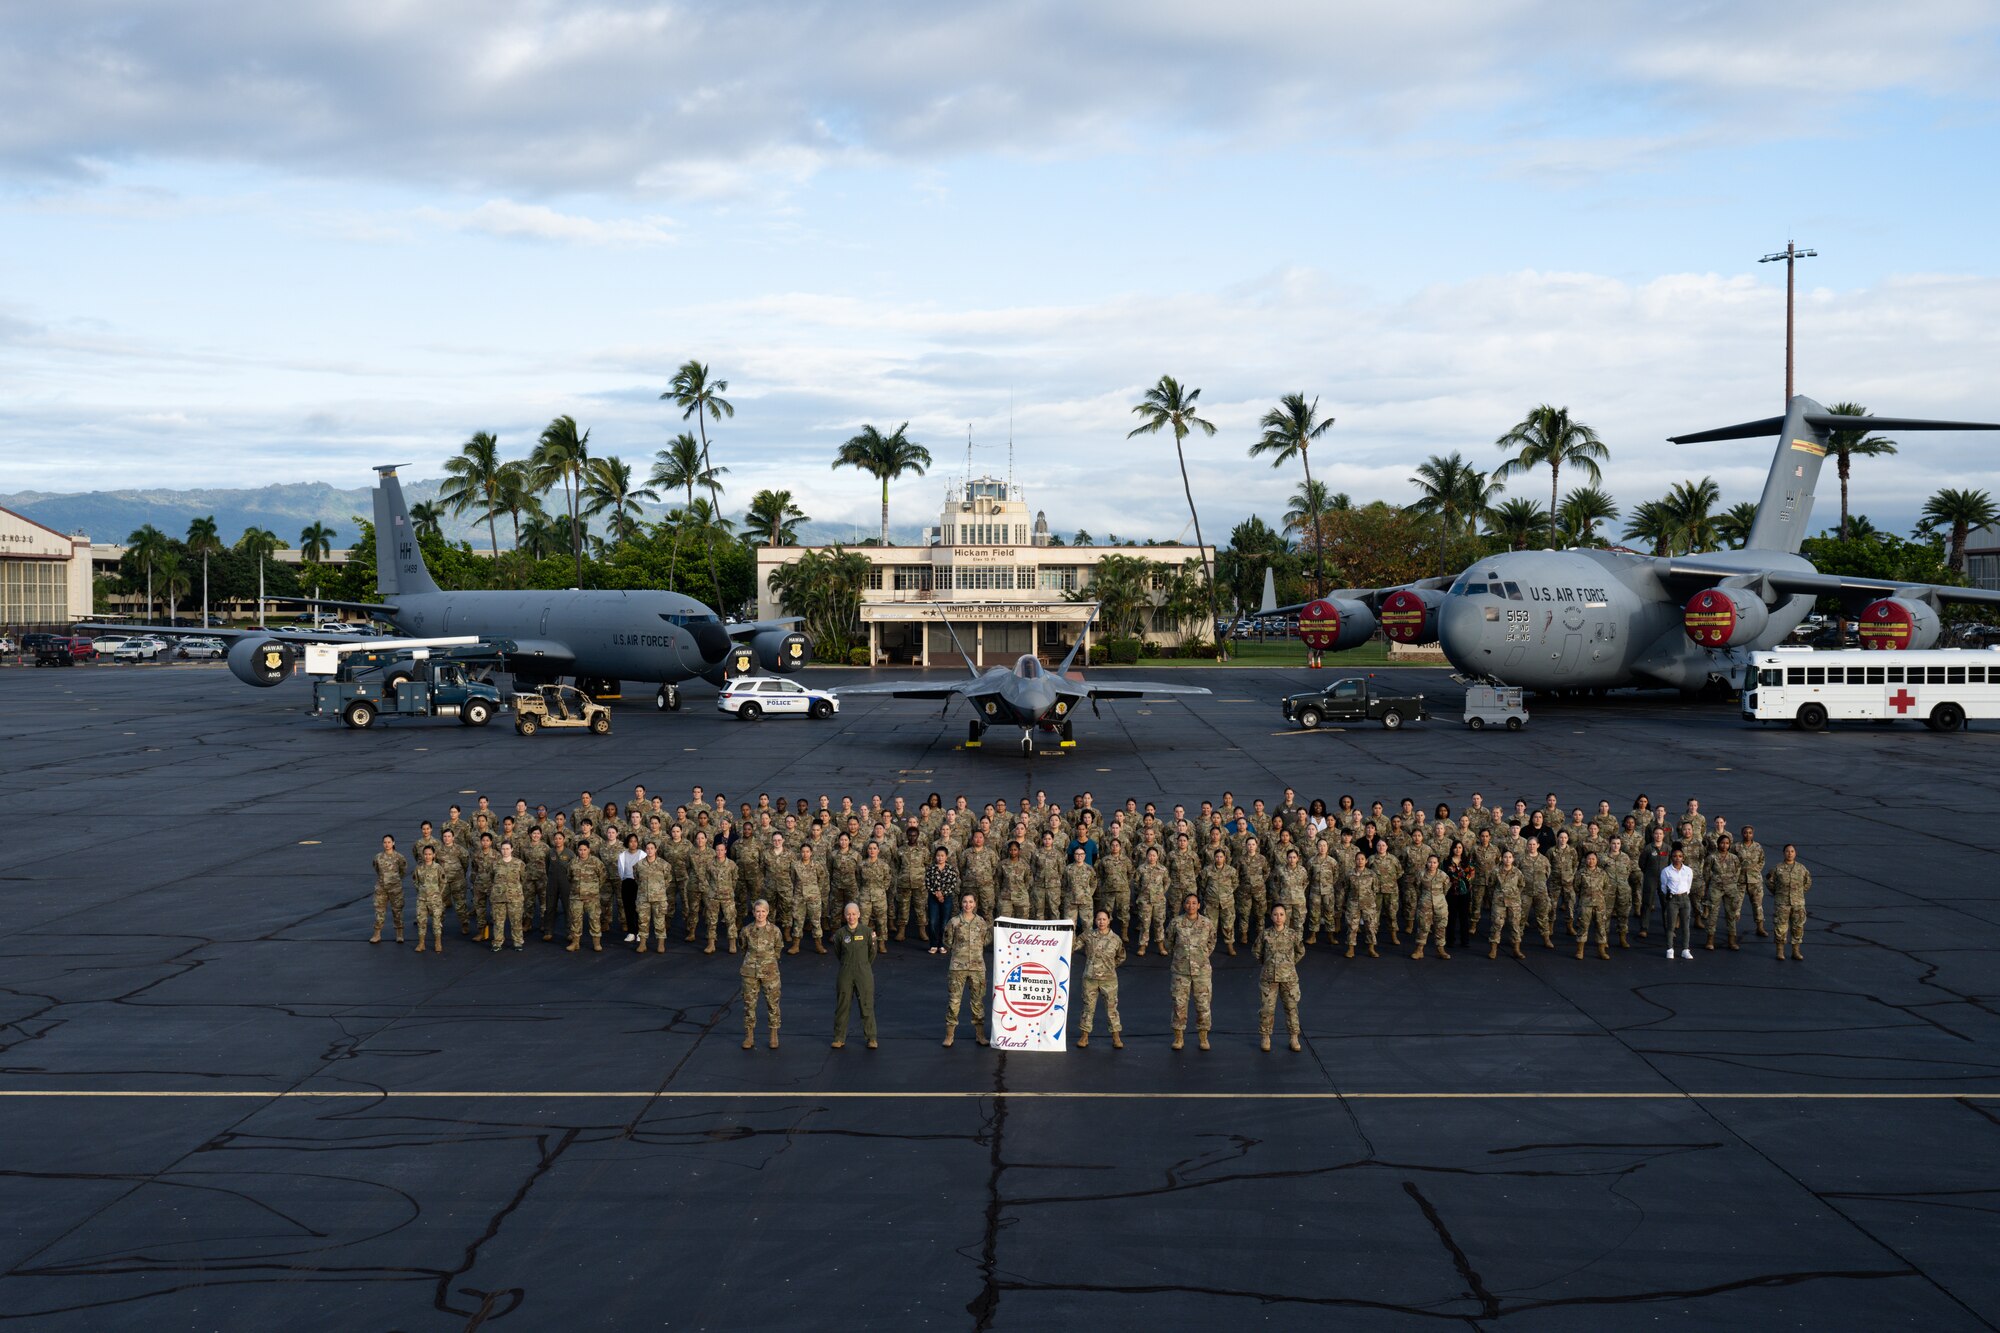 Women assigned to Joint Base Pearl Harbor Hickam stand for a group photo with static aircraft in the background